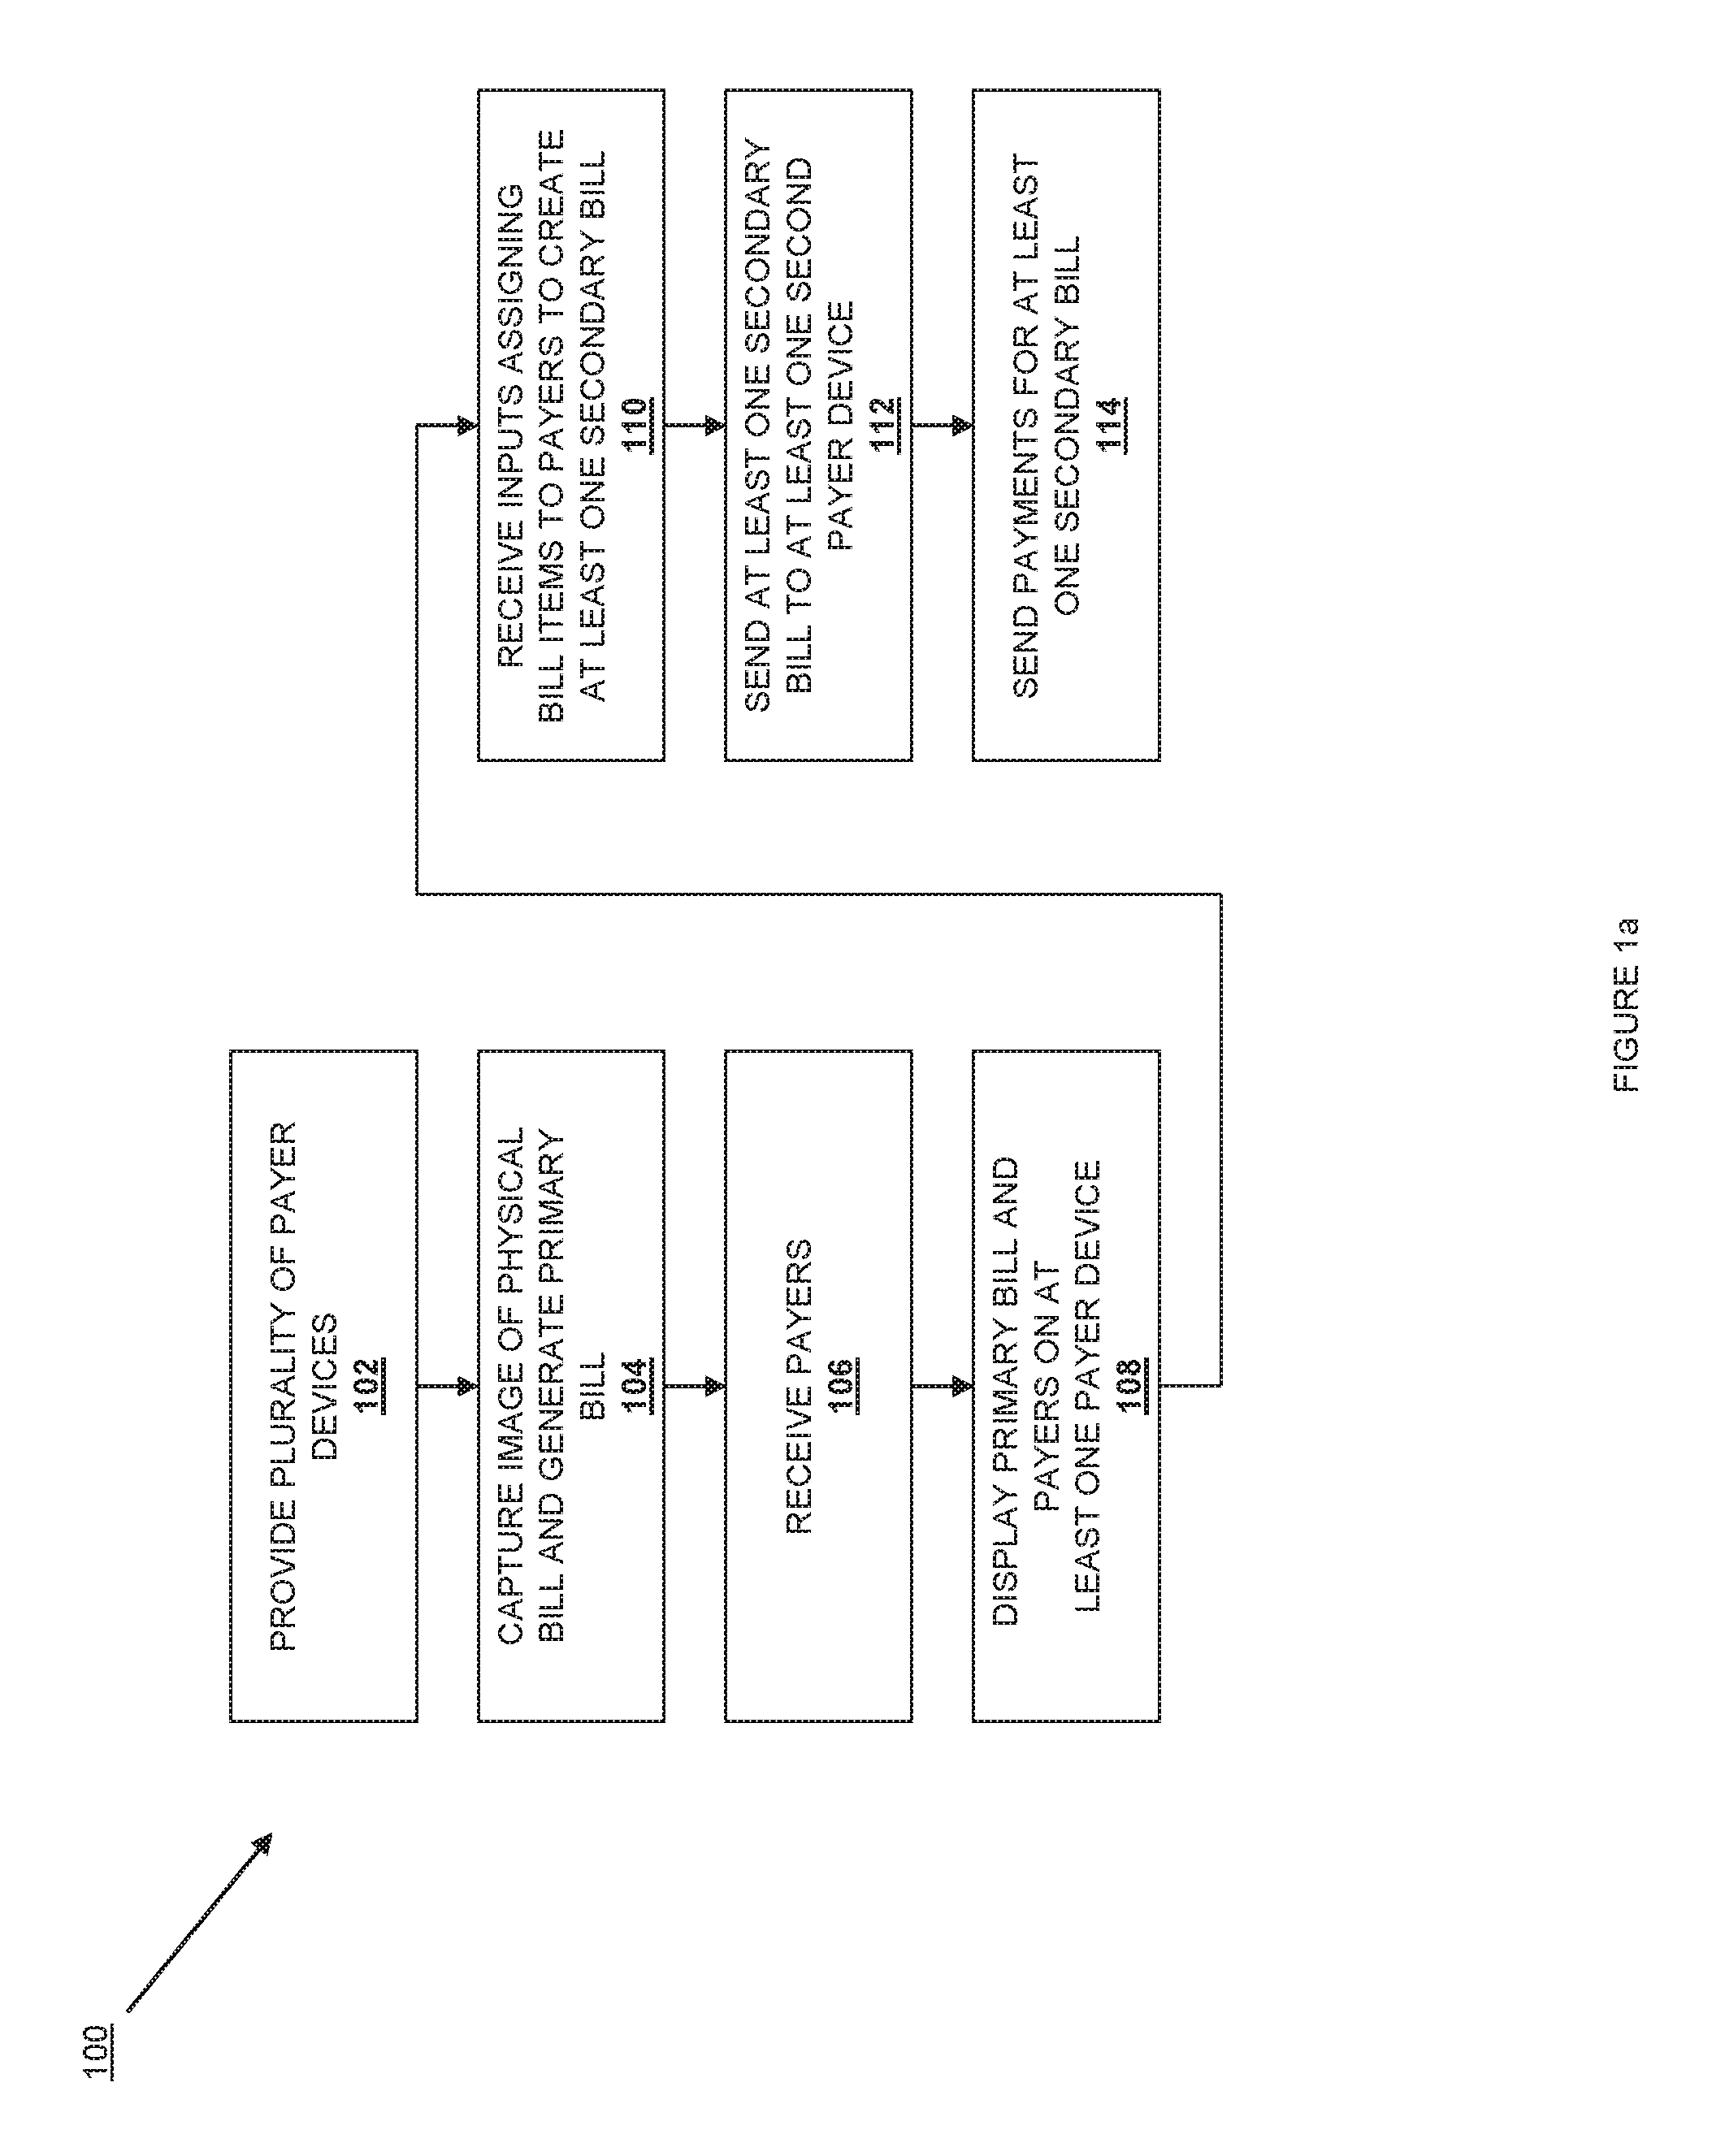 Mobile device nfc-based detection and merchant payment system